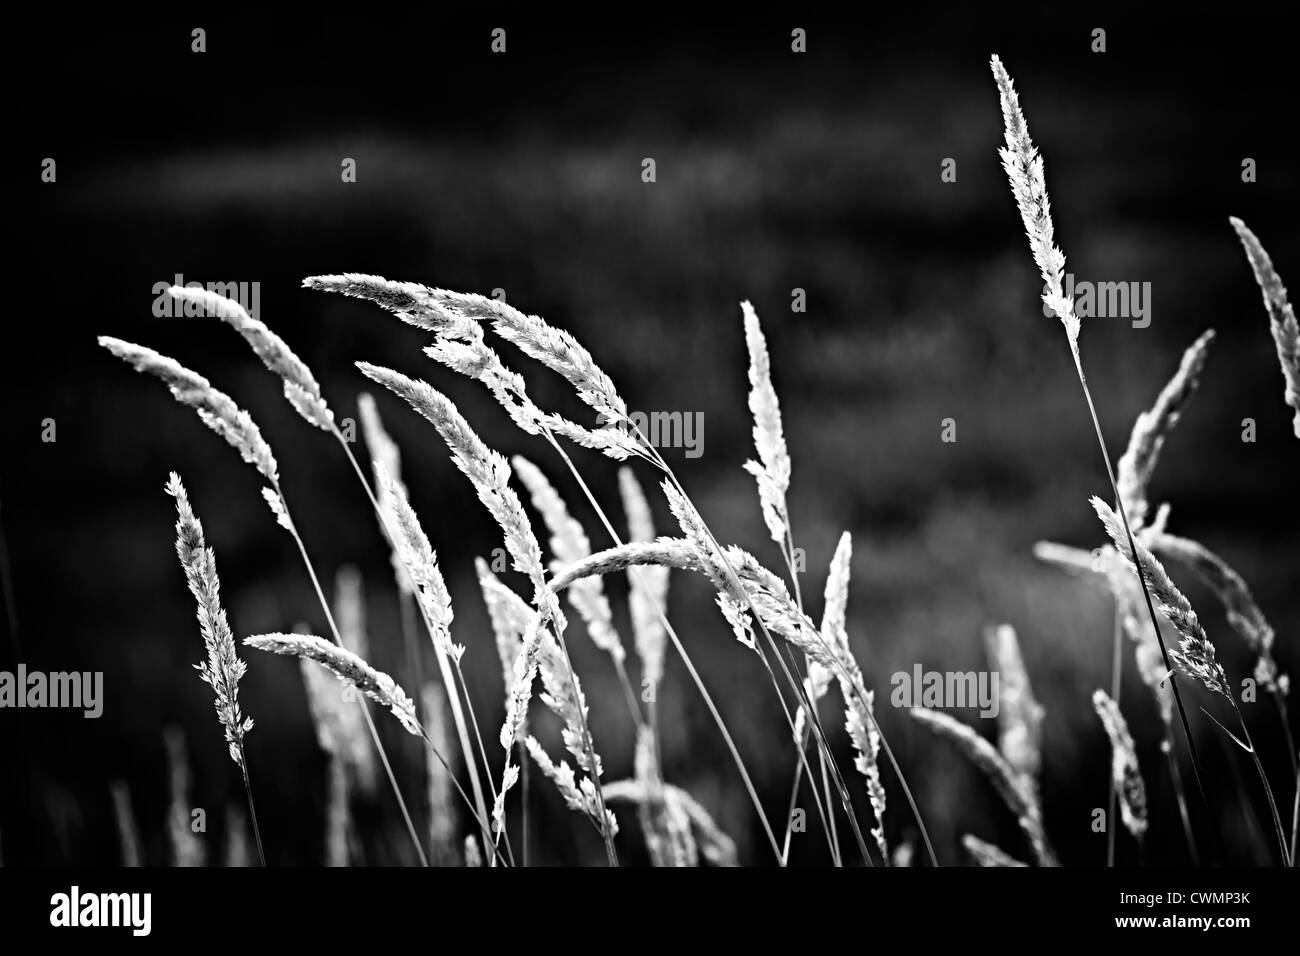 Tall wild grass stalks growing in black and white Stock Photo